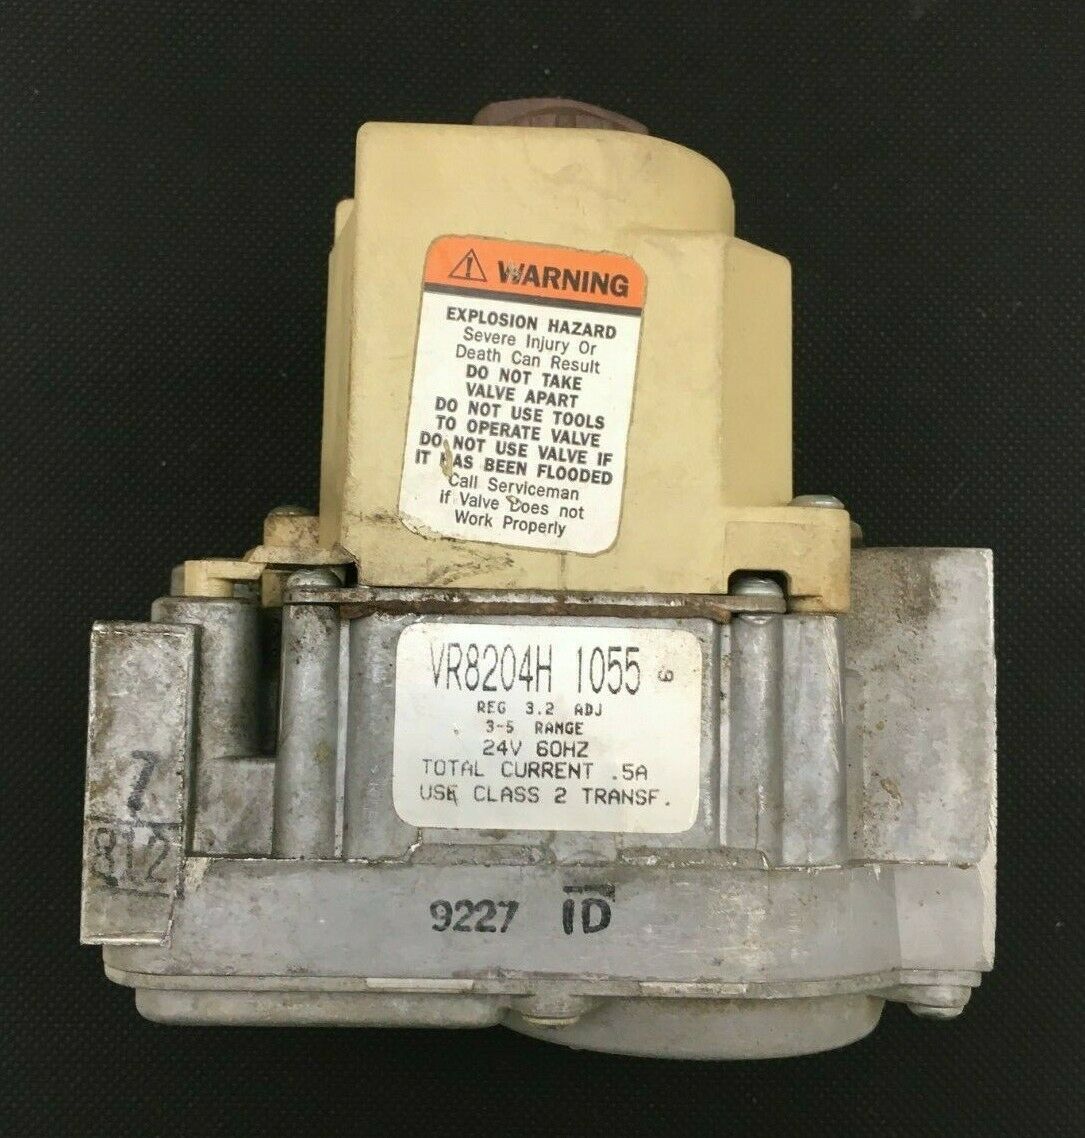 Primary image for Honeywell Furnace Gas Valve VR8204H 1055  used, #G315